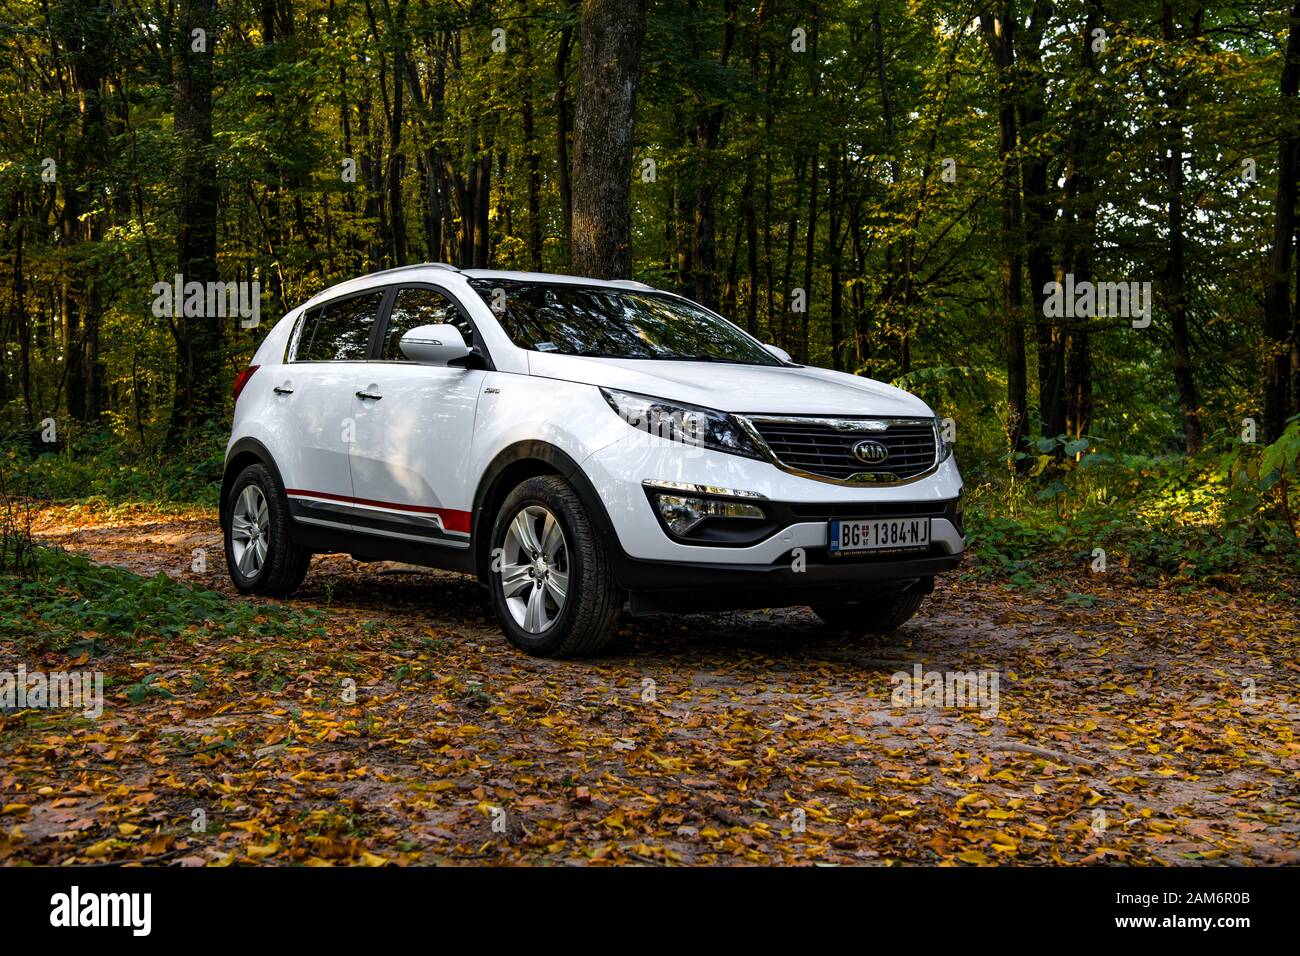 SUV car Kia Sportage 2.0 CRDI awd or 4x4, on the forest road, coverd with  dried leaves, beautiful car landscape, with dominant autumn colors. Stock Photo